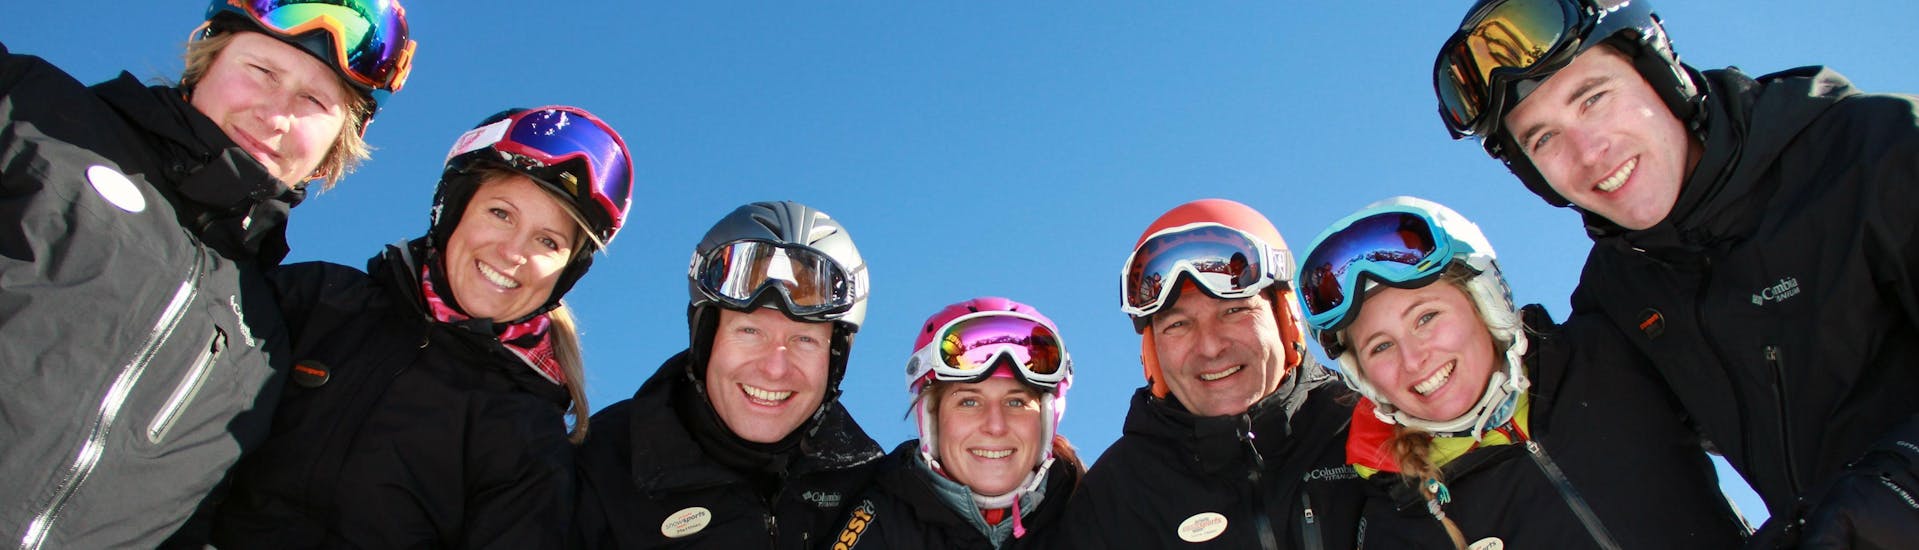 Private Snowboarding Lessons for All Levels with Private Snowsports Team Gstaad - Hero image